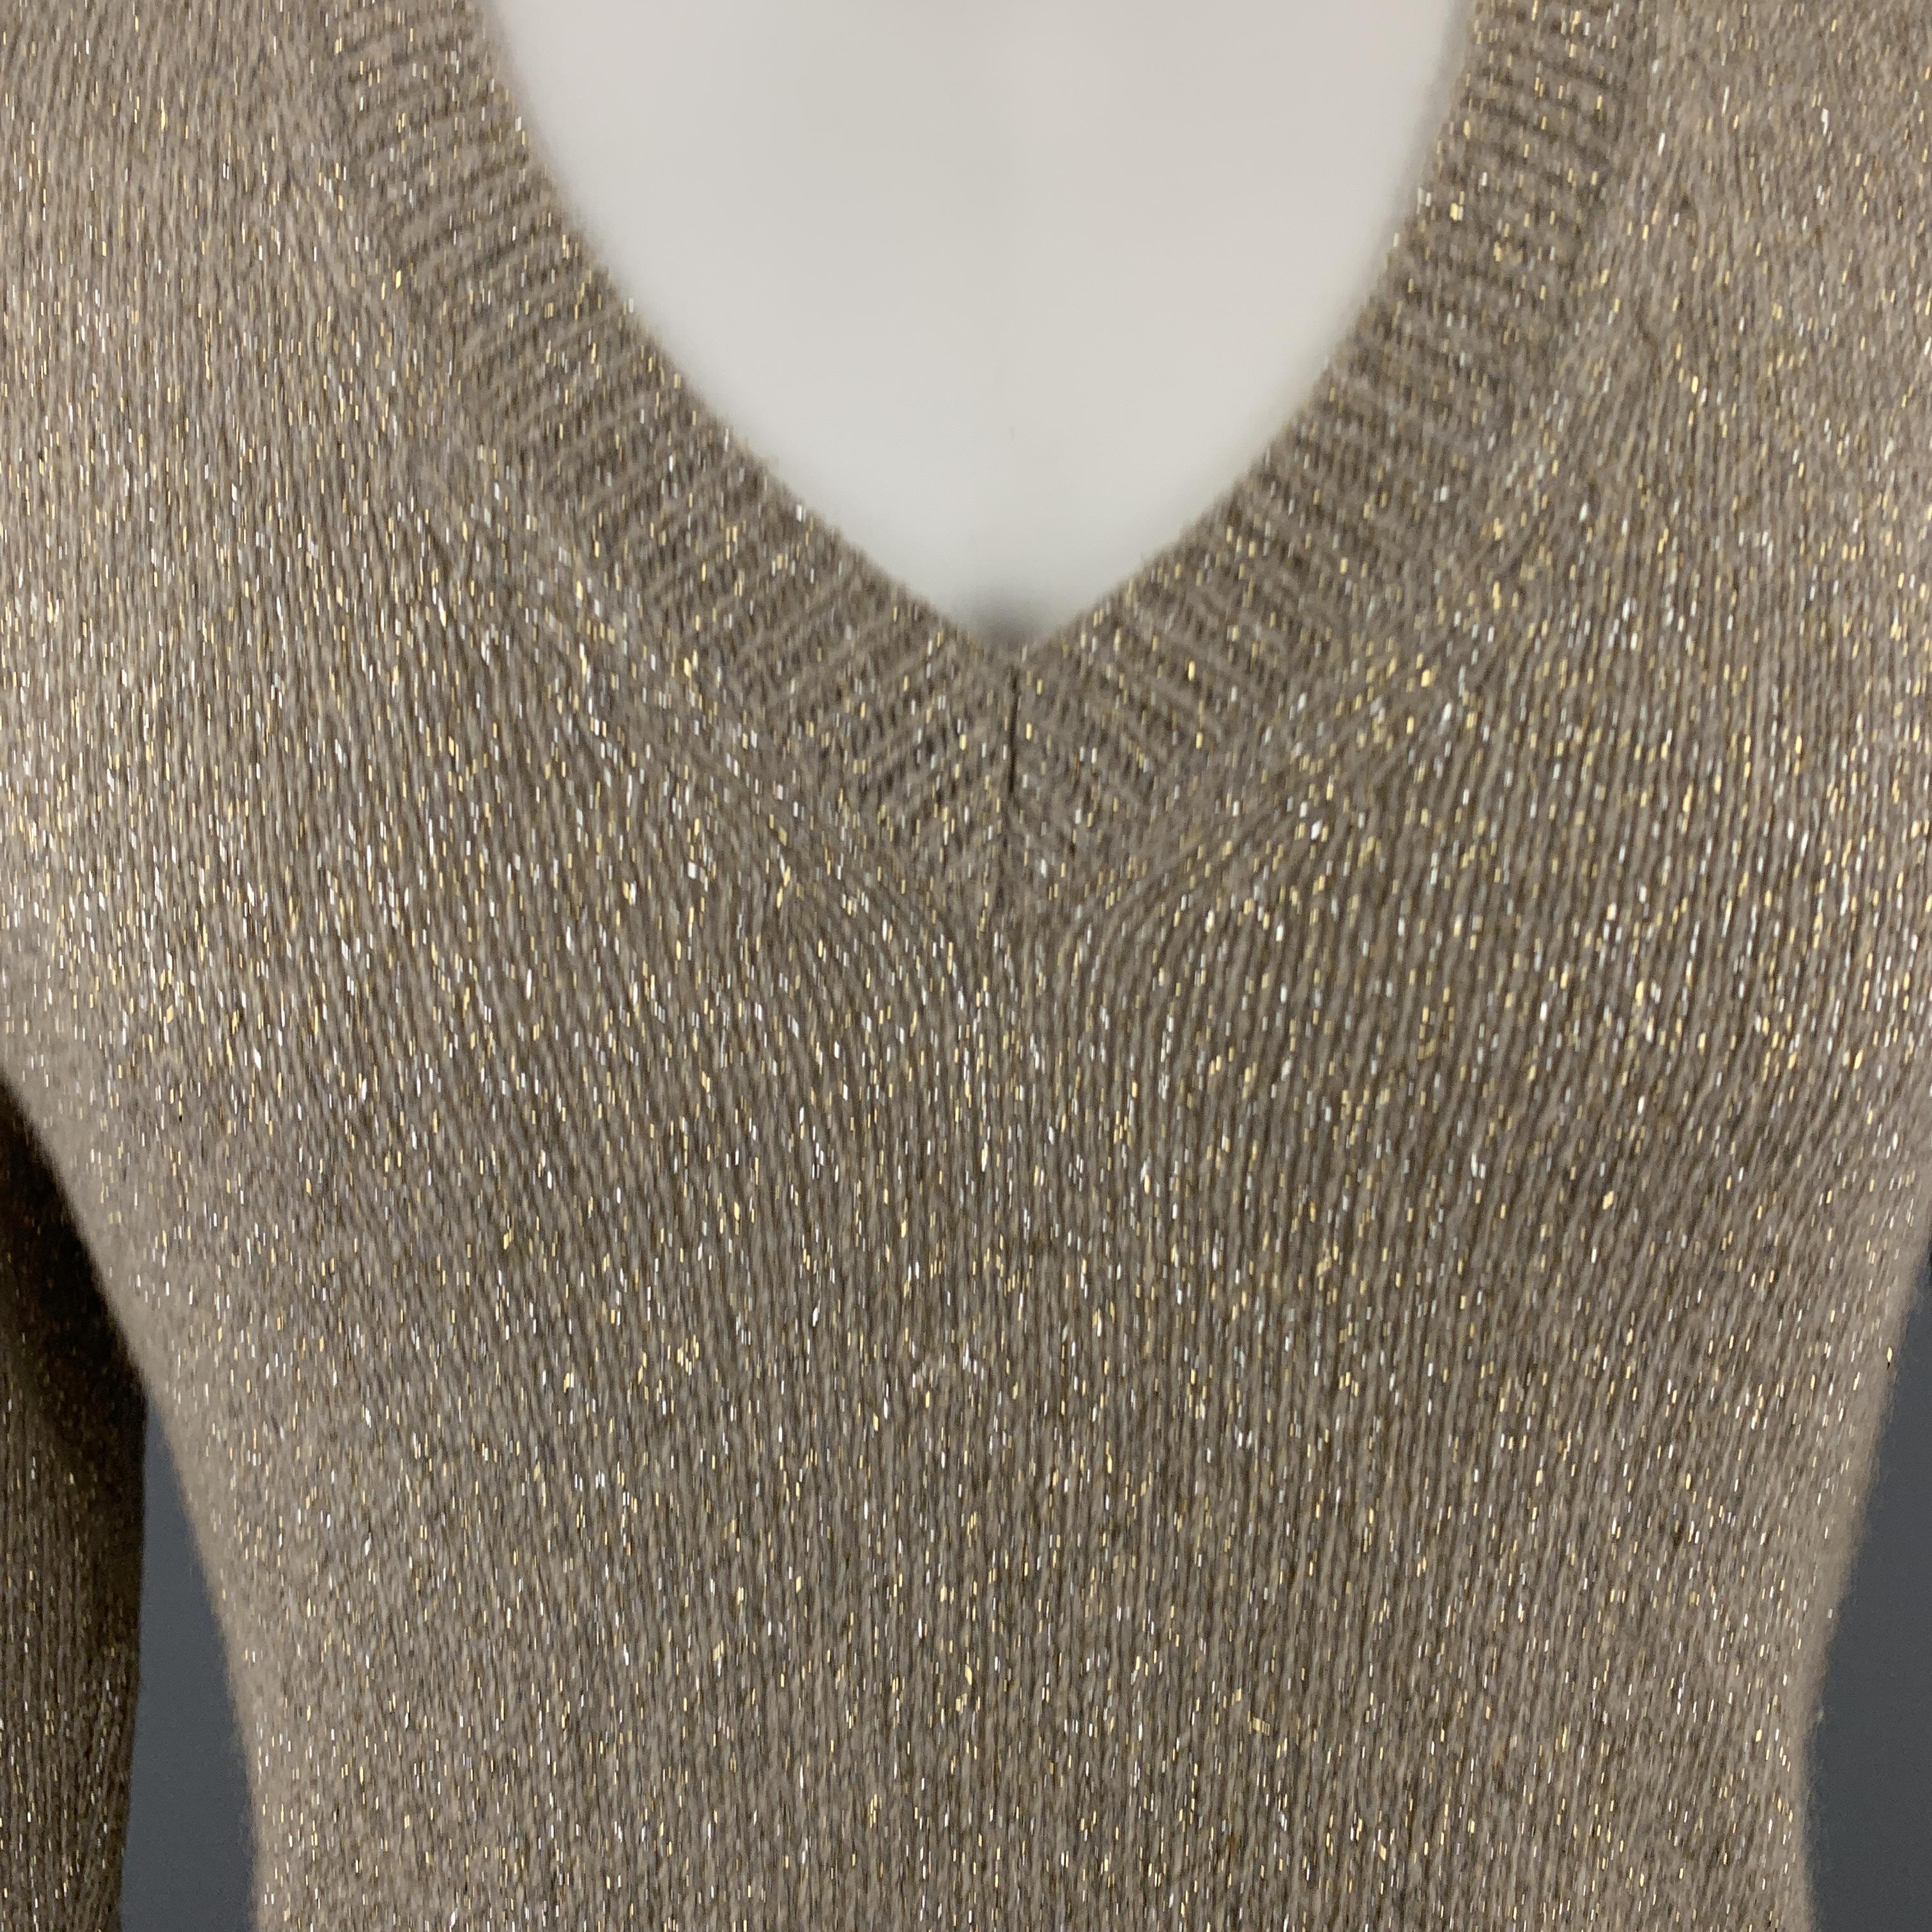 DRIES VAN NOTEN sweater comes in gold sparkle knit with a V neck and ribbed waistband. Made in Belgium. 

Very Good Pre-Owned Condition.
Marked: Medium

Measurements:

Shoulder: 17 in.
Chest: 40 in.
Sleeve: 28 in.
Length: 27 in.